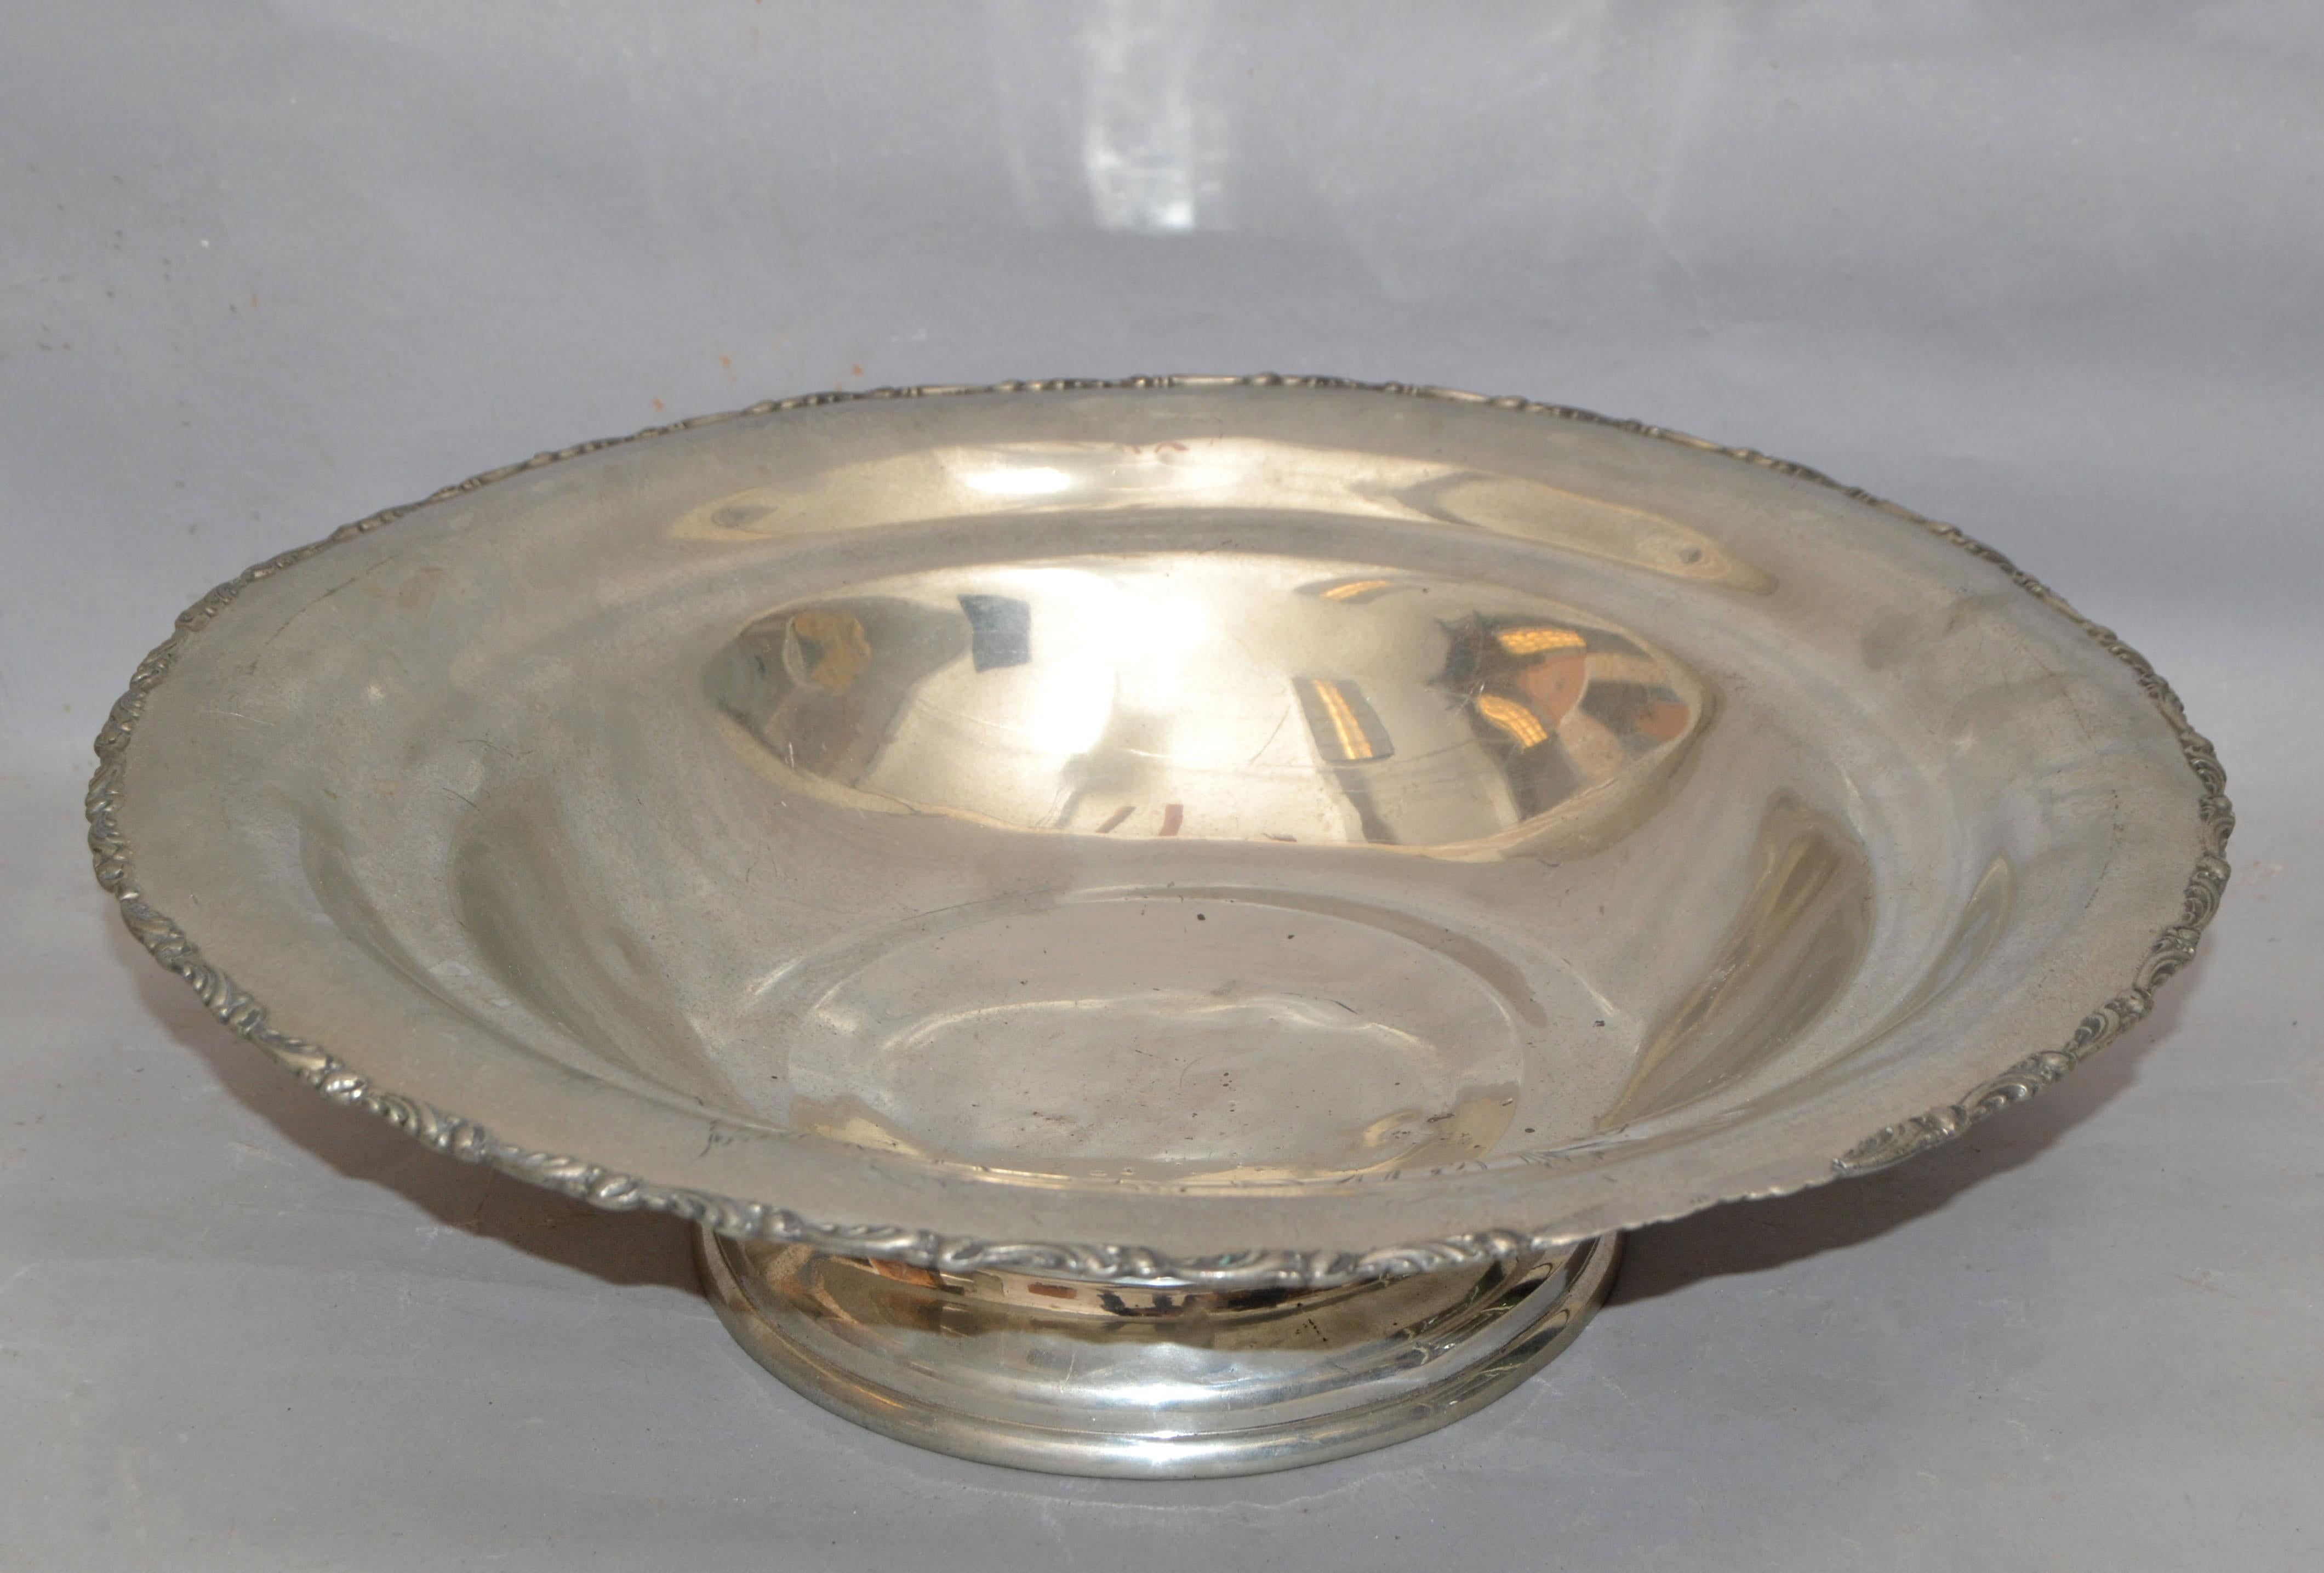 English Silver Plate Trademark Ornate Large Bowl Footed Serving Dish Punch Bowl im Angebot 6